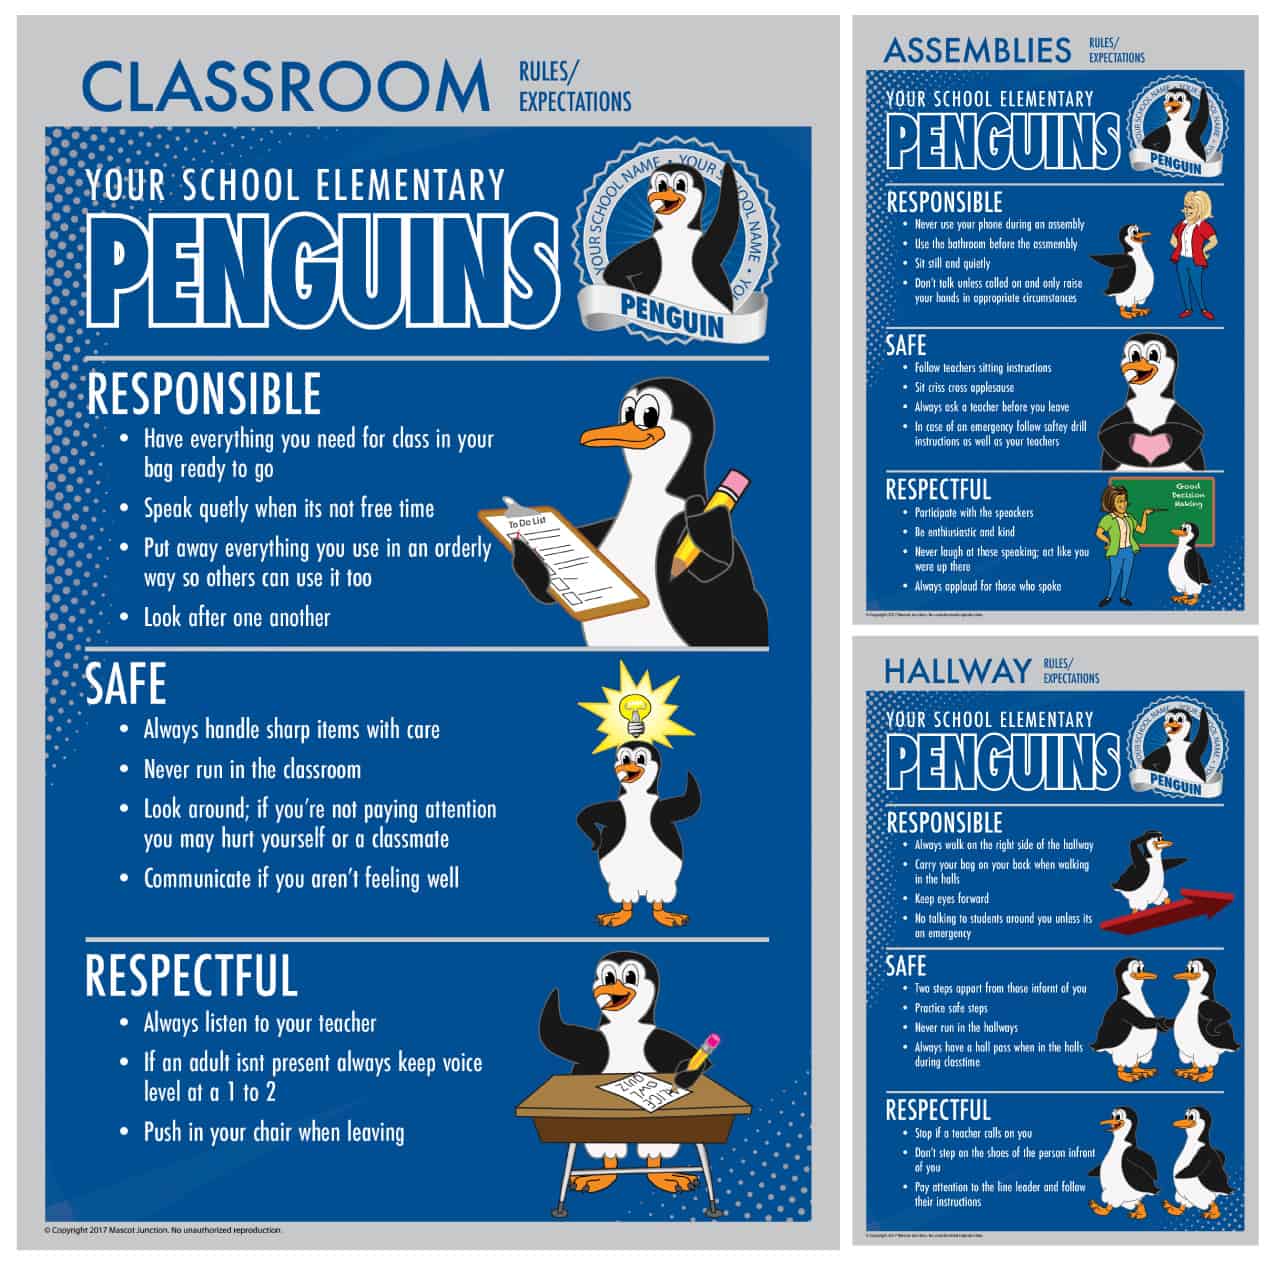 Rules-posters_penguin